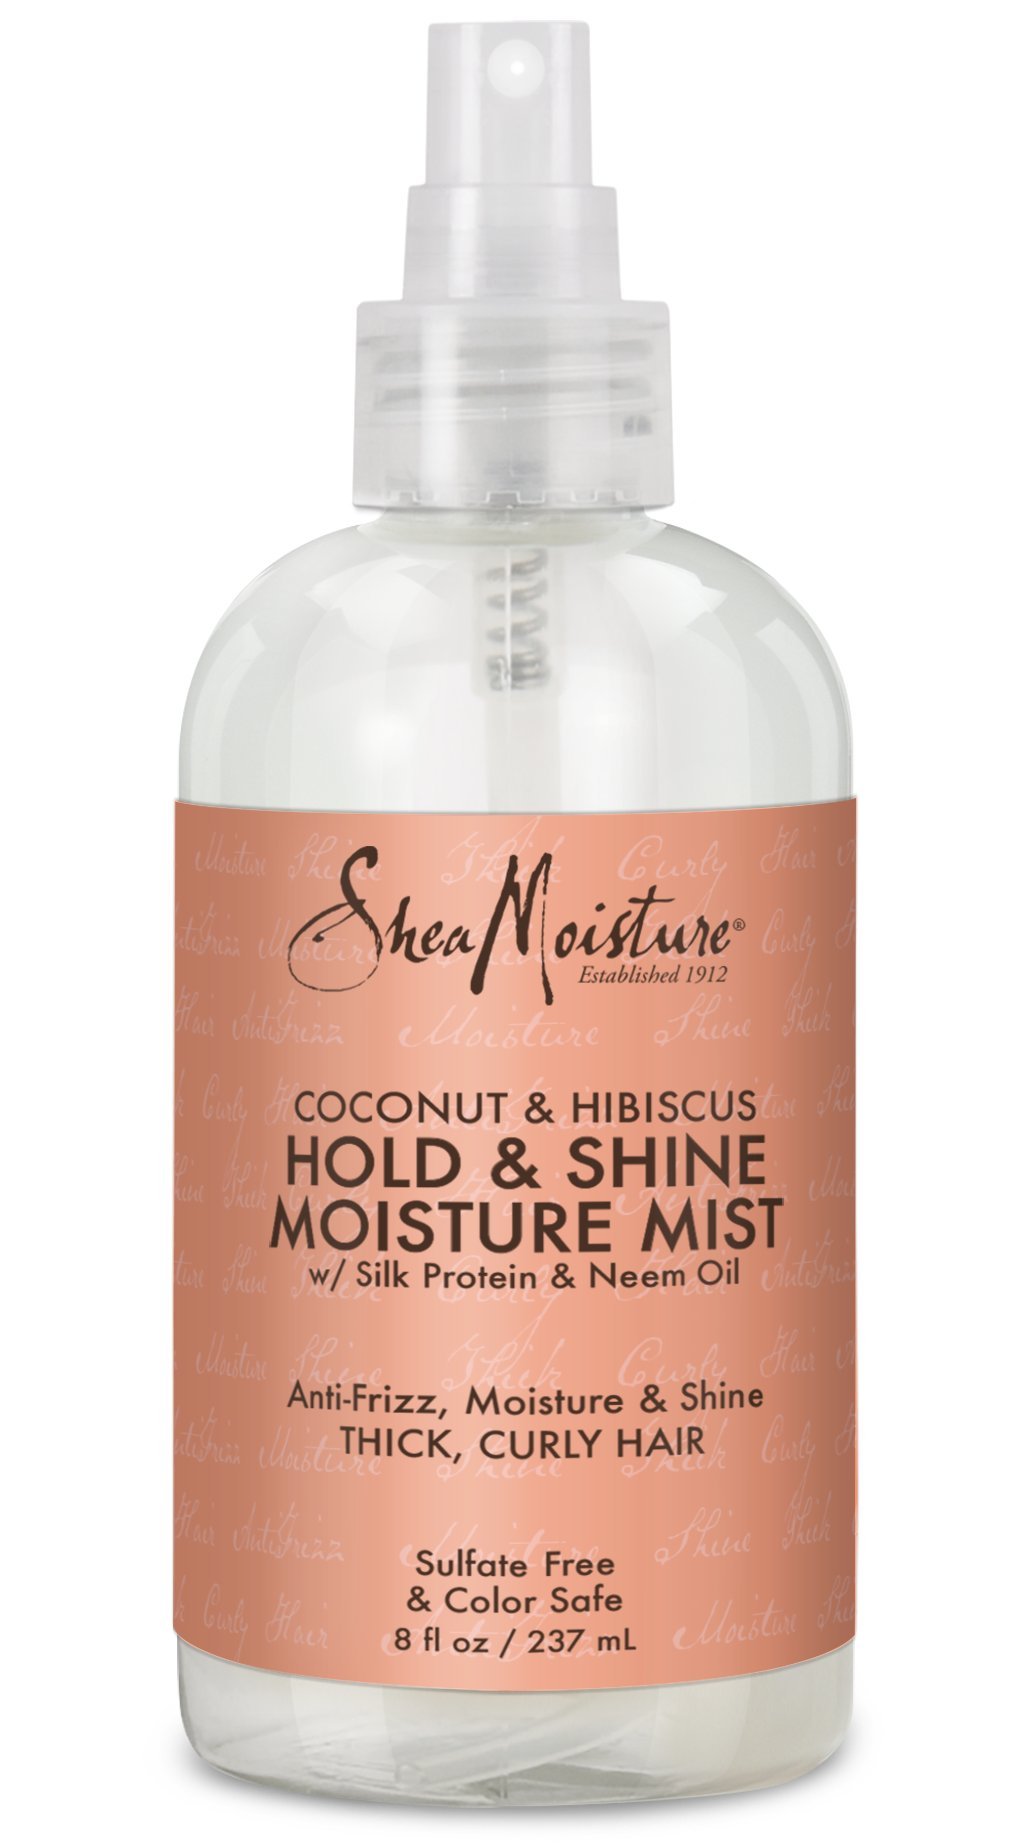 shea moisture coconut and hibiscus reviews